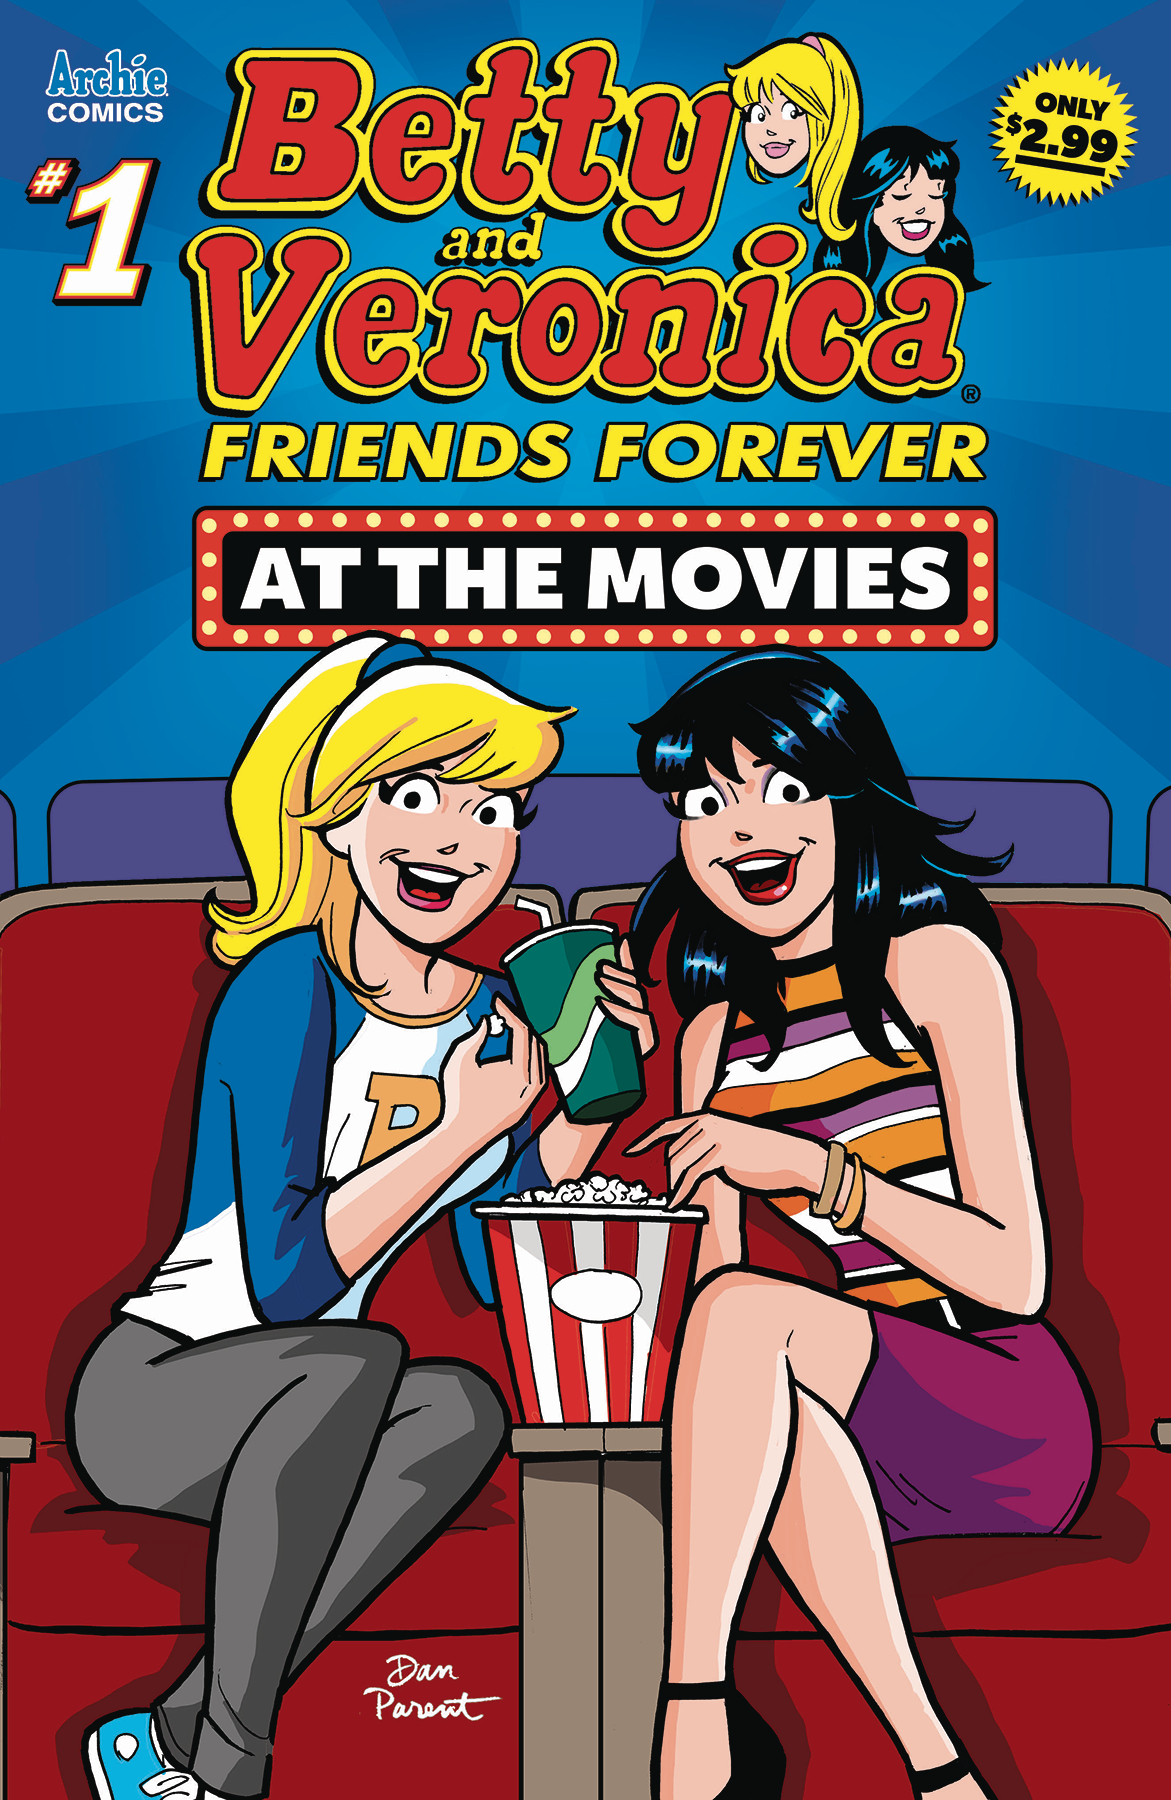 BETTY AND VERONICA FRIENDS FOREVER AT THE MOVIES #1